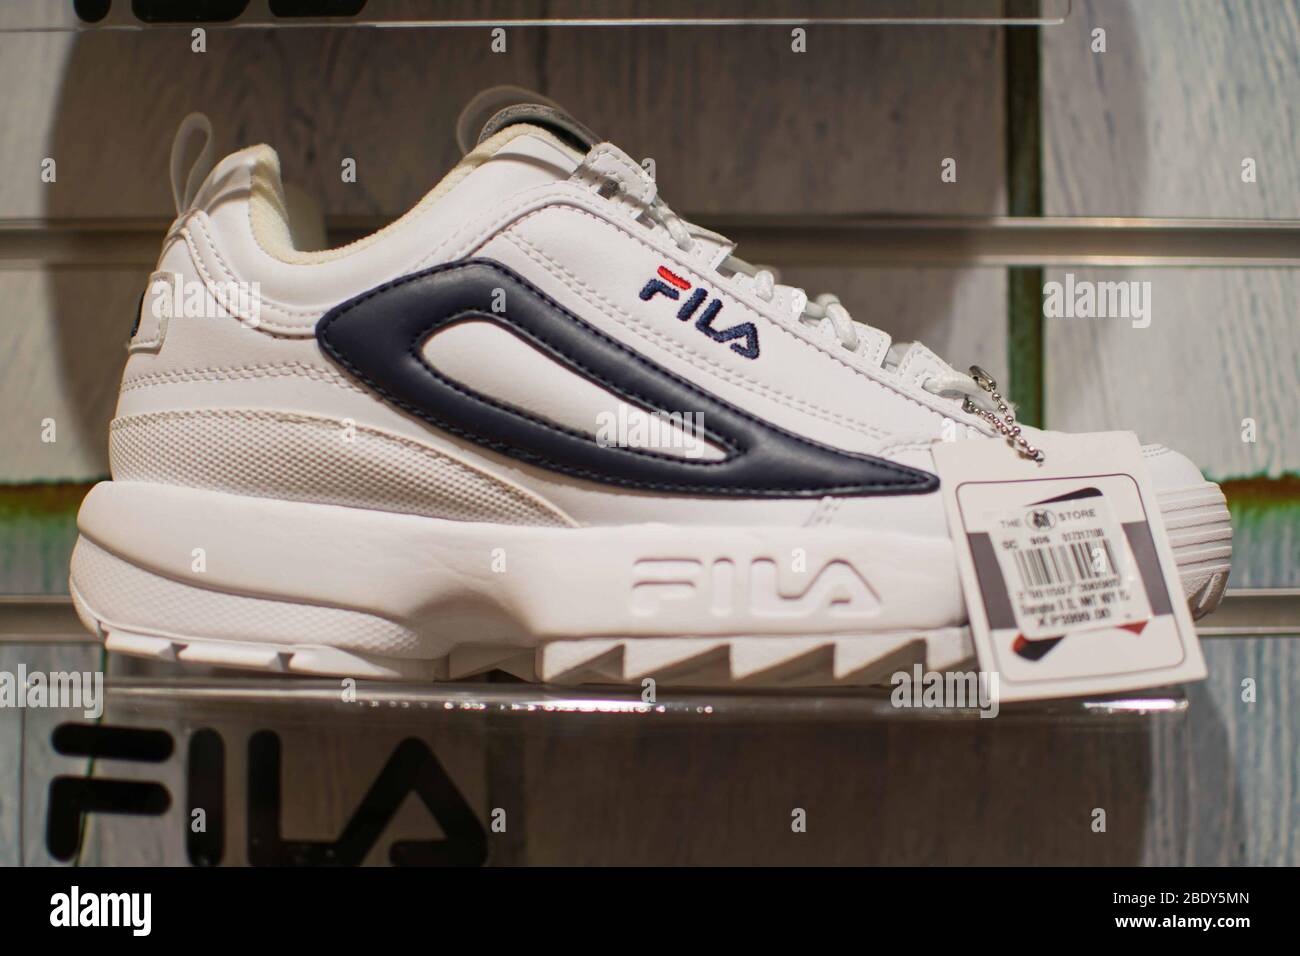 Fila Shoes High Resolution Stock Photography and Images - Alamy